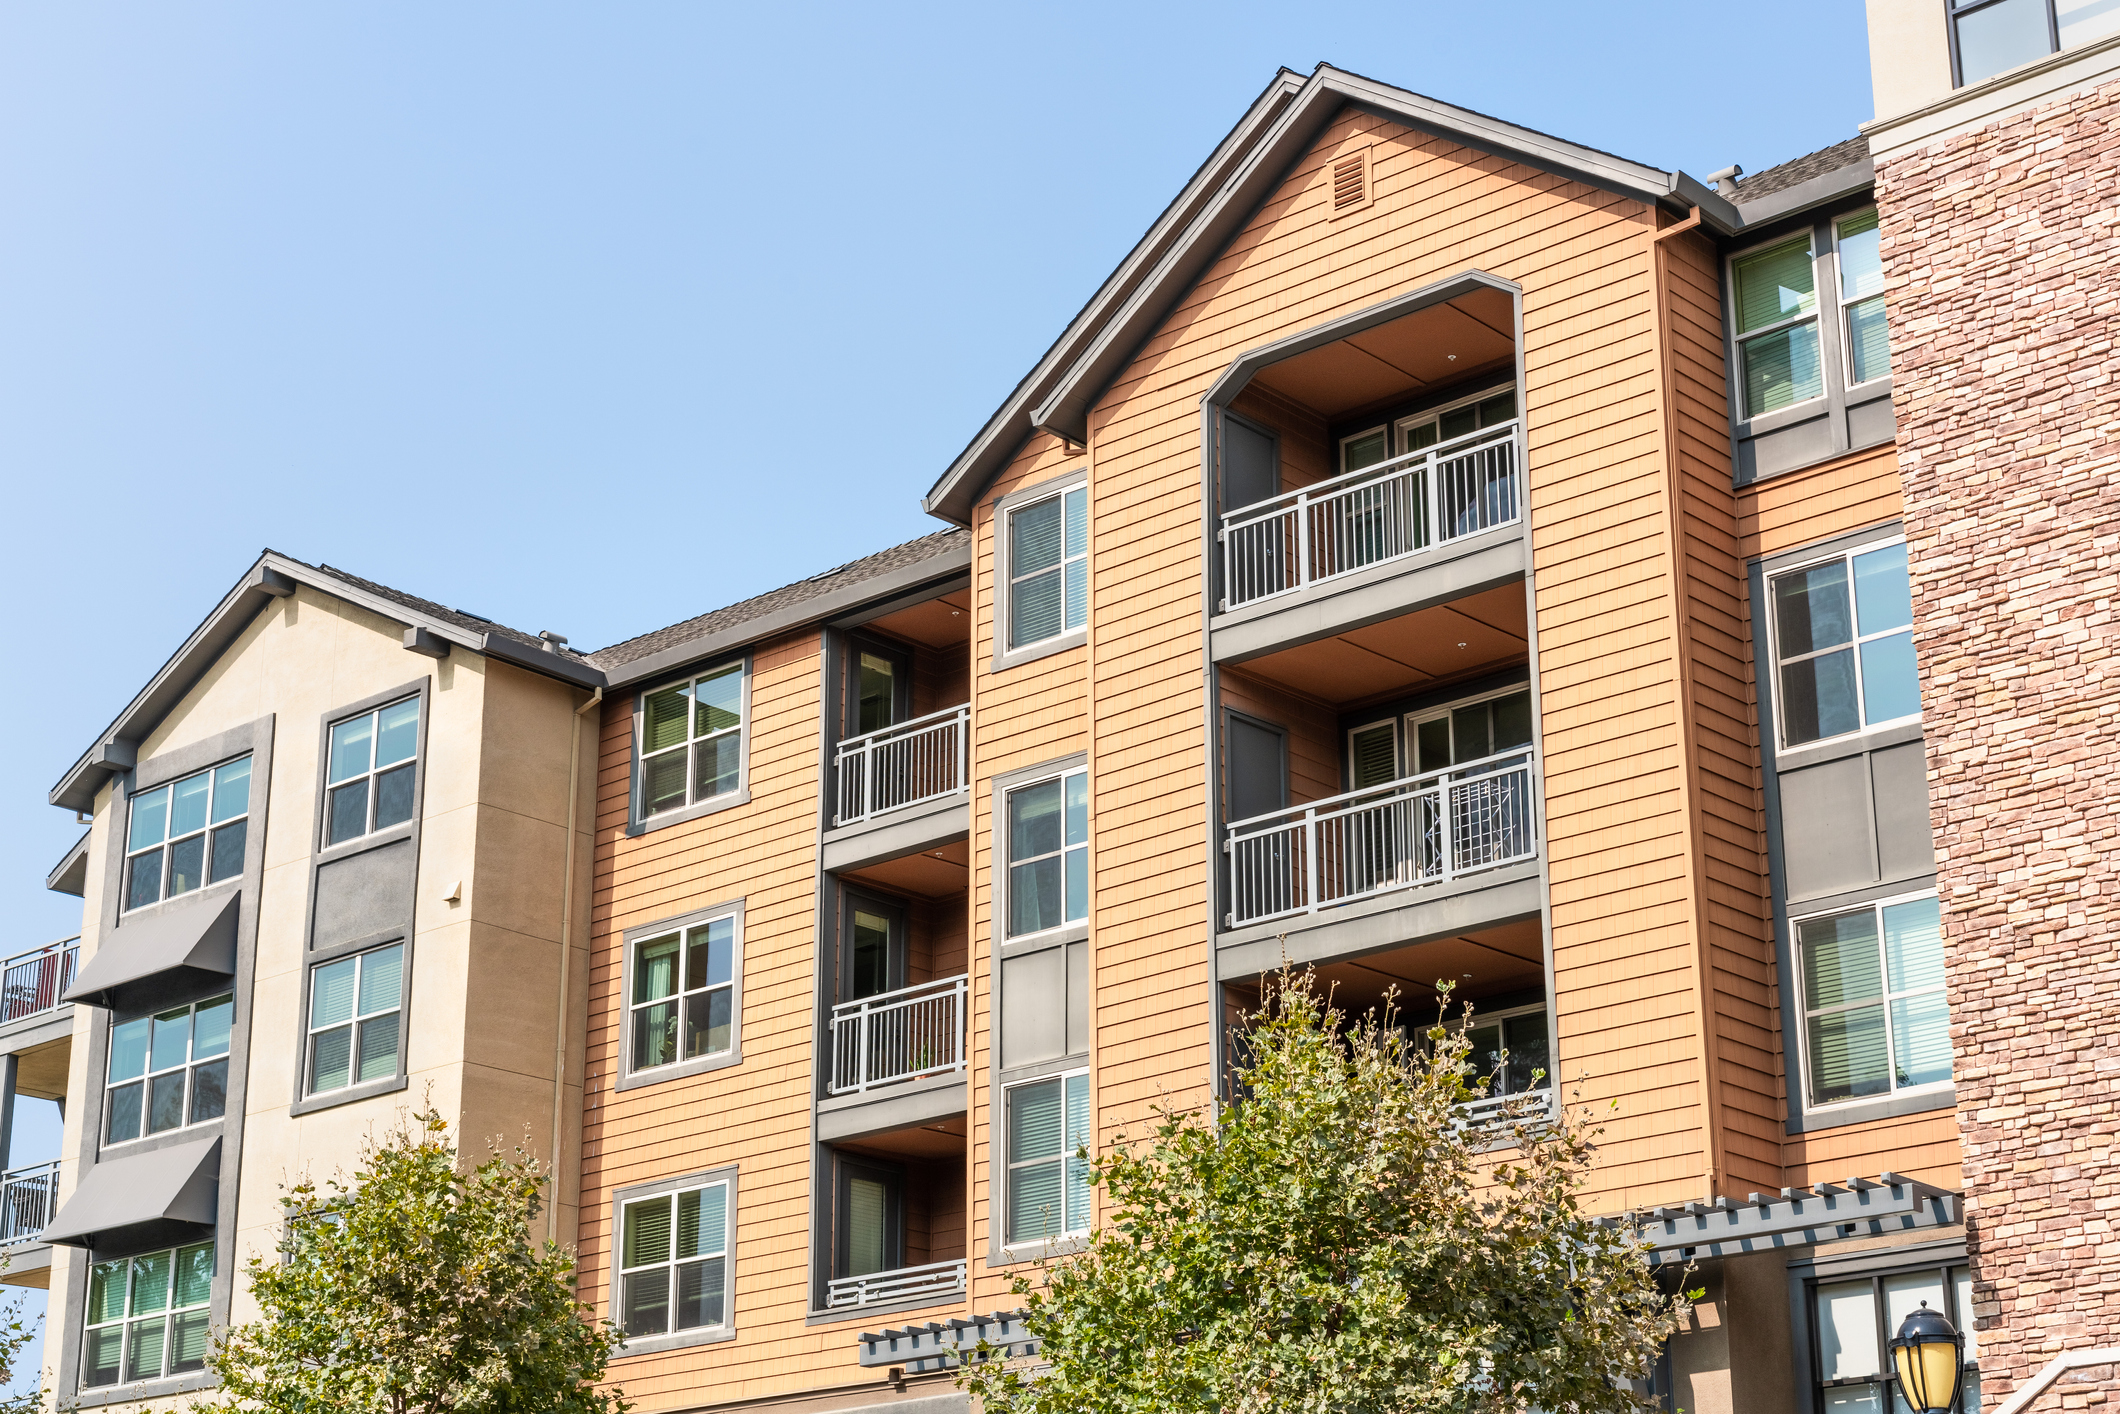 Carter Multifamily Buys Alabama Apartments for $36.6 Million